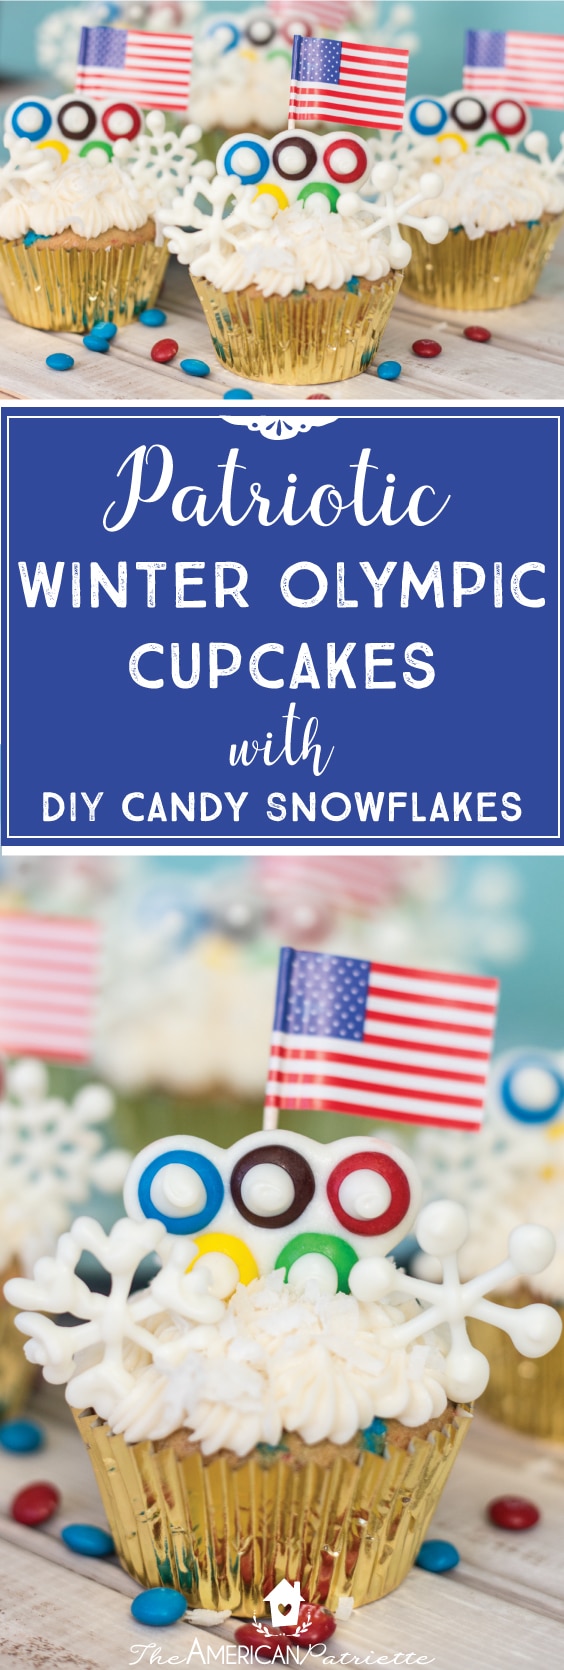 Patriotic Winter Olympic Cupcakes with Candy Snowflakes